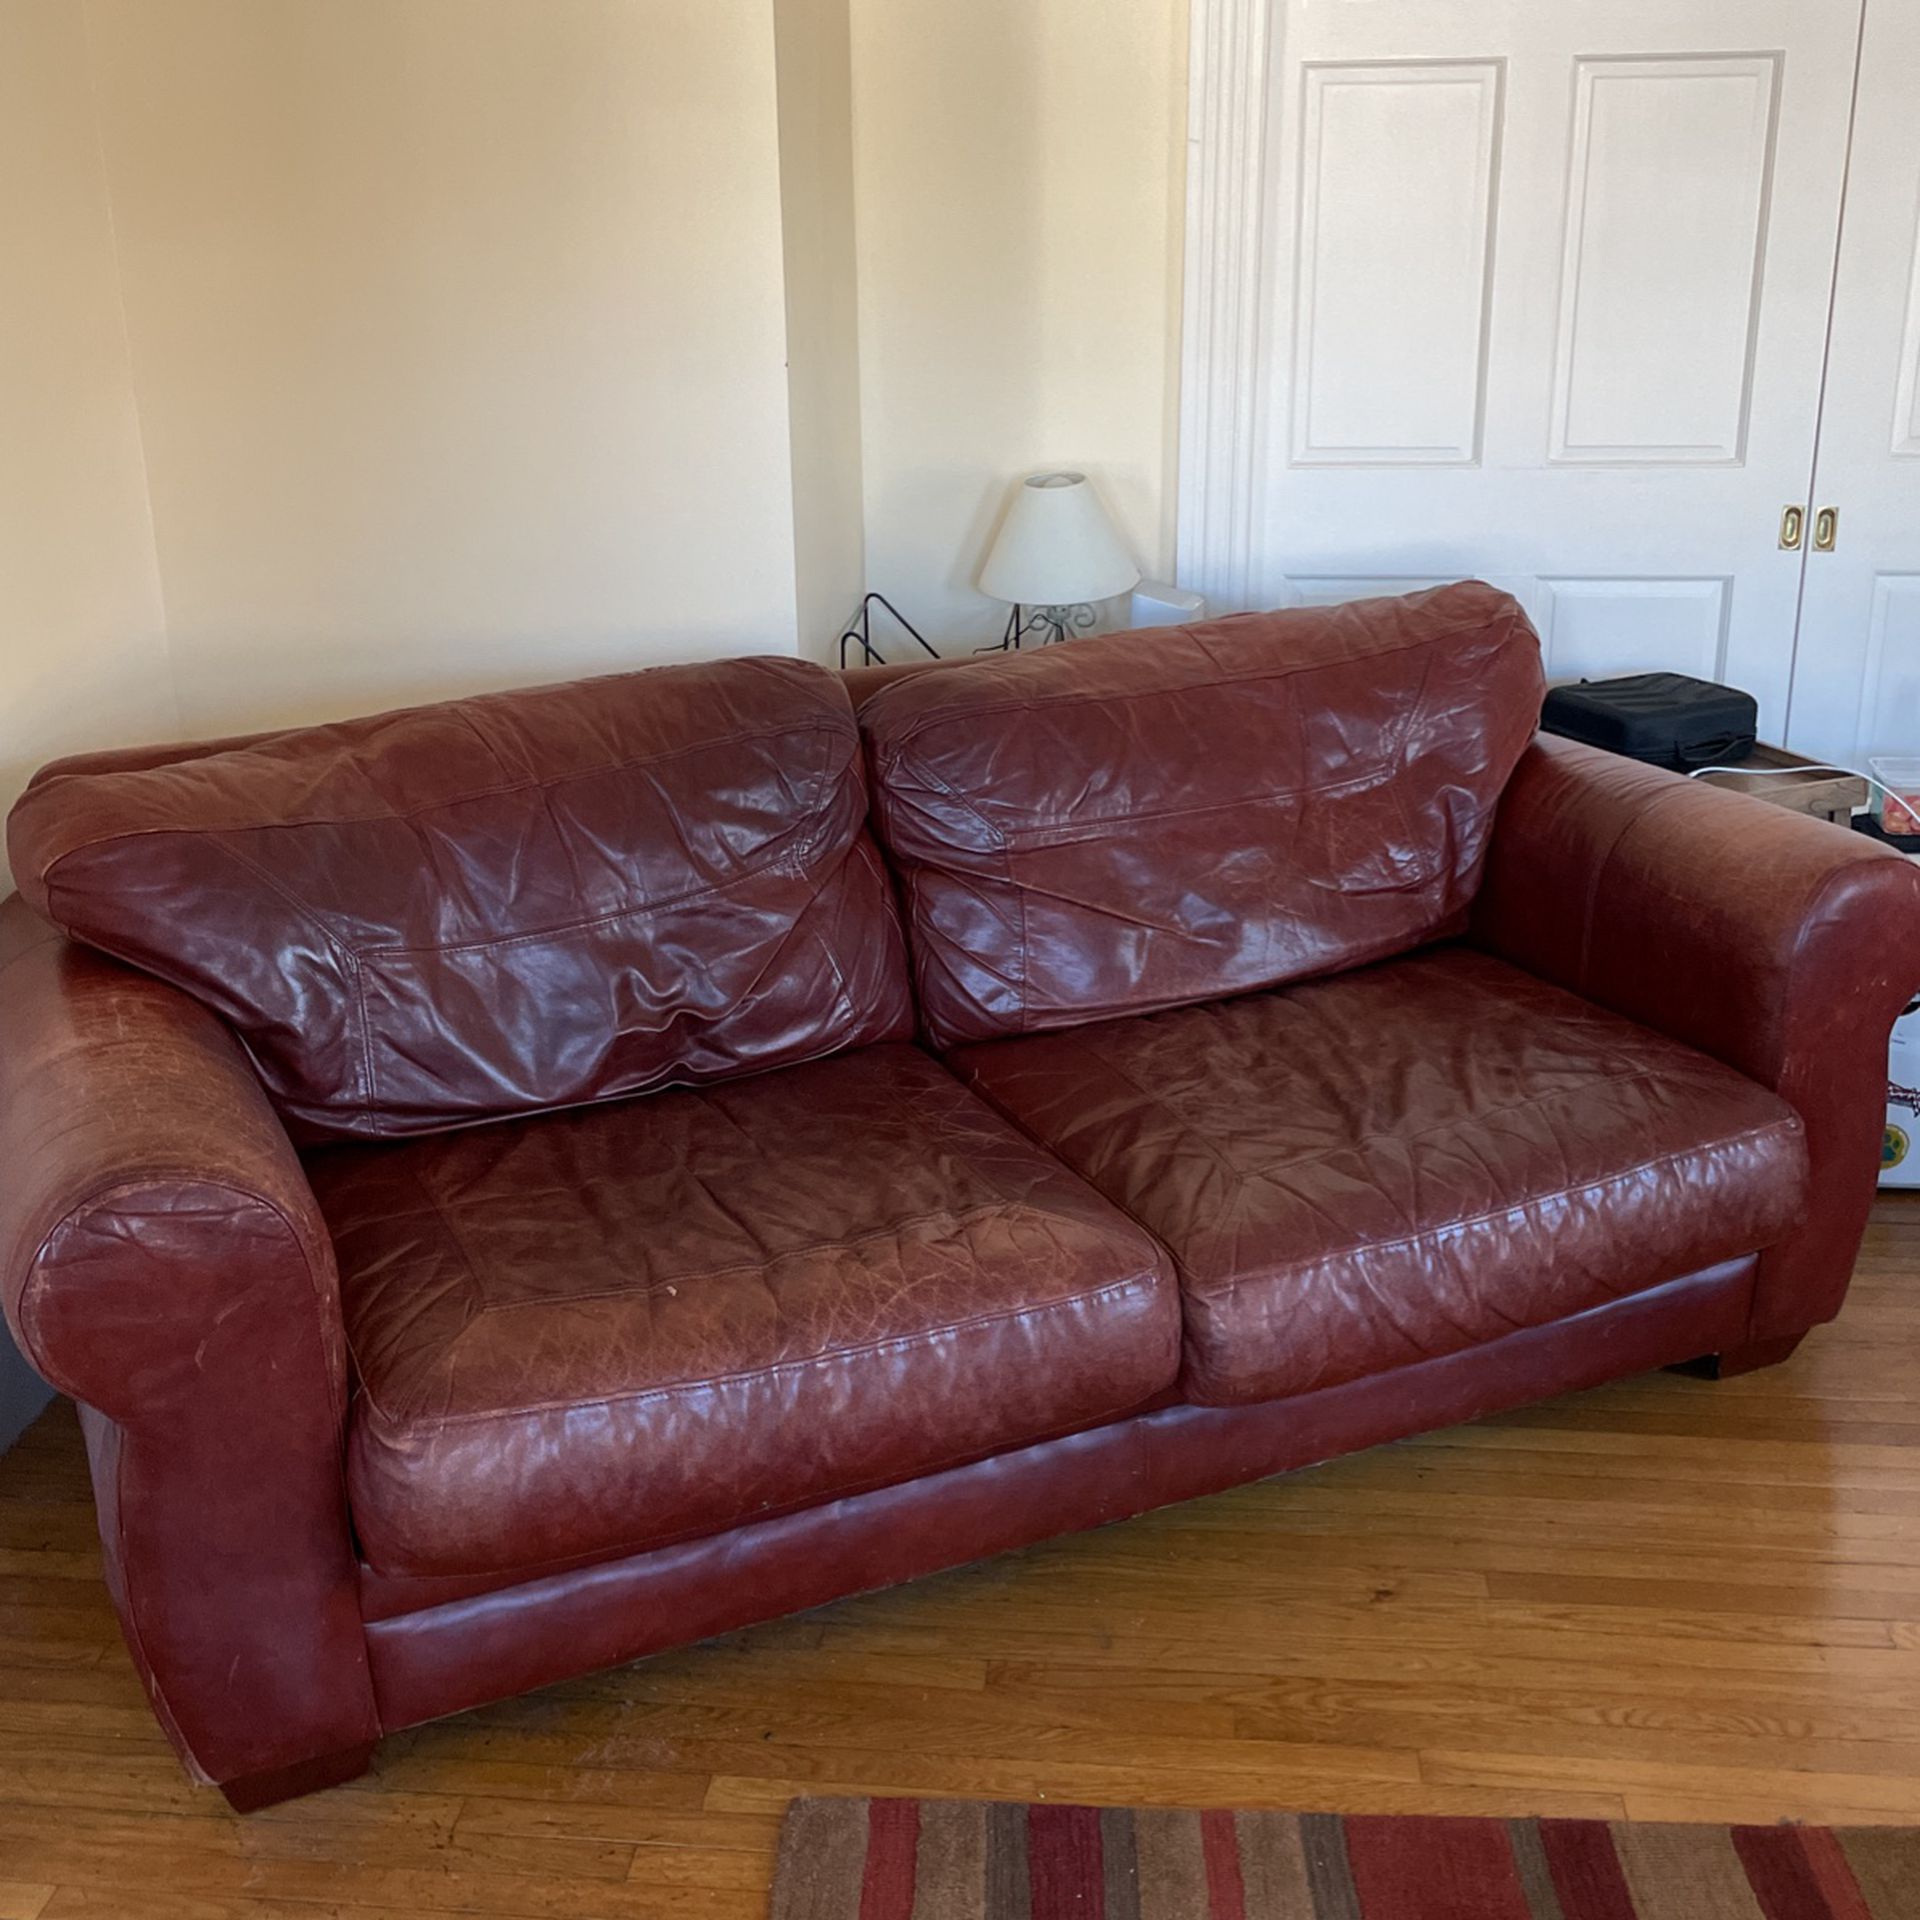 Red leather couch & chair with footrest